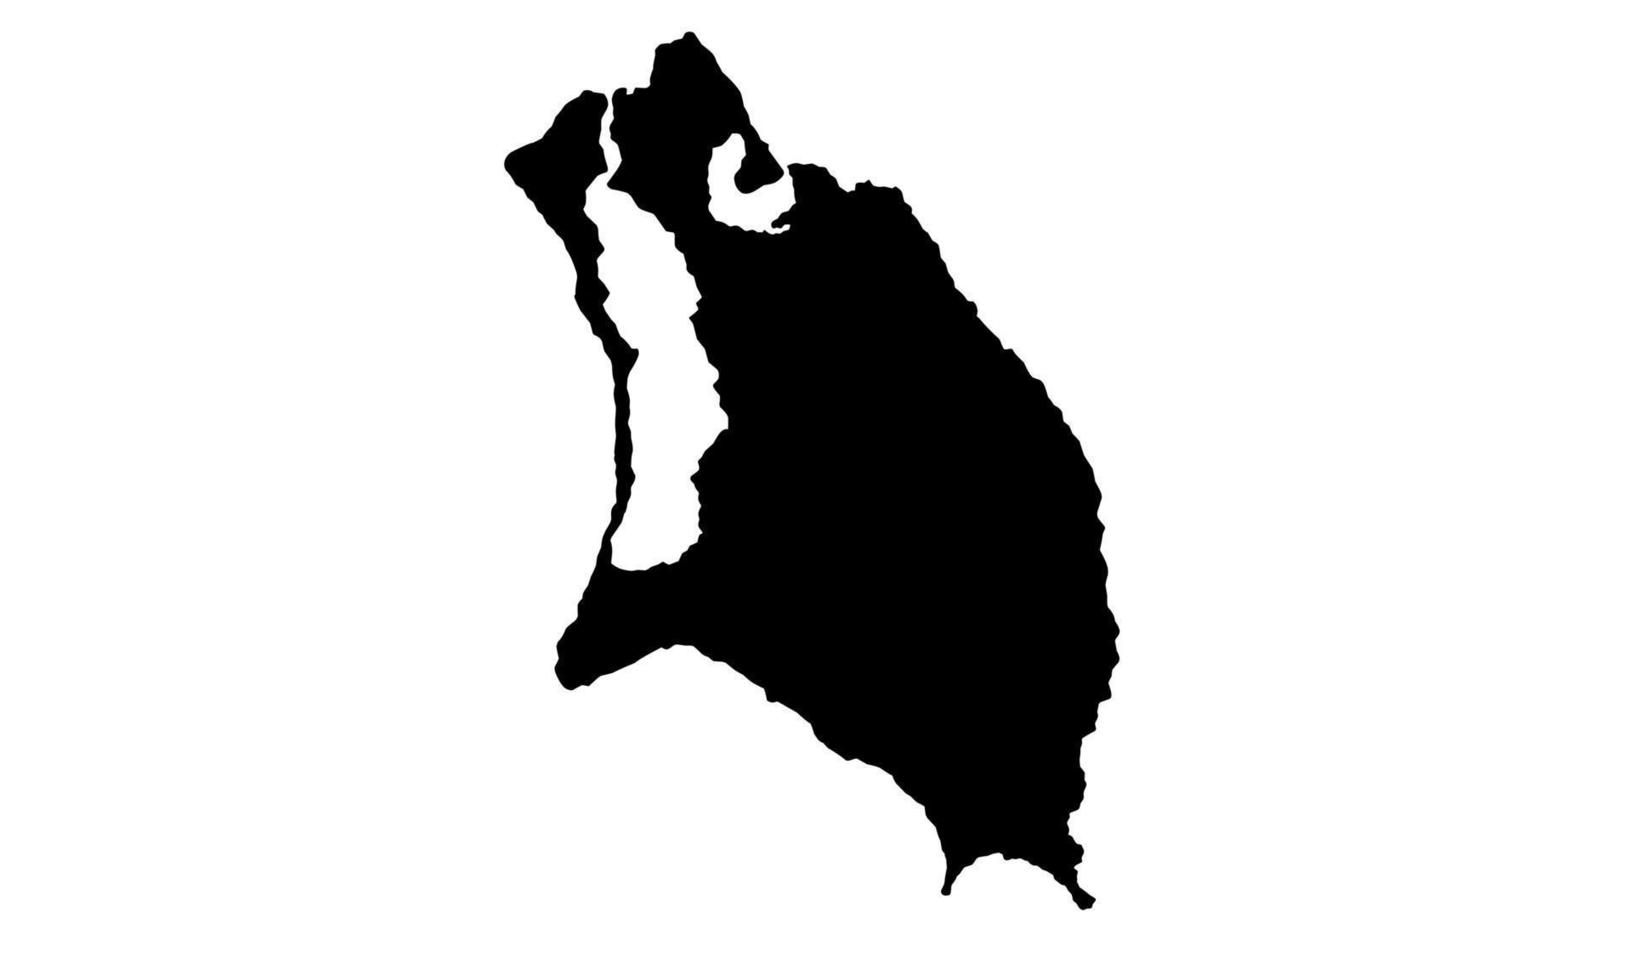 BARBUDA map black silhouette on white background vector